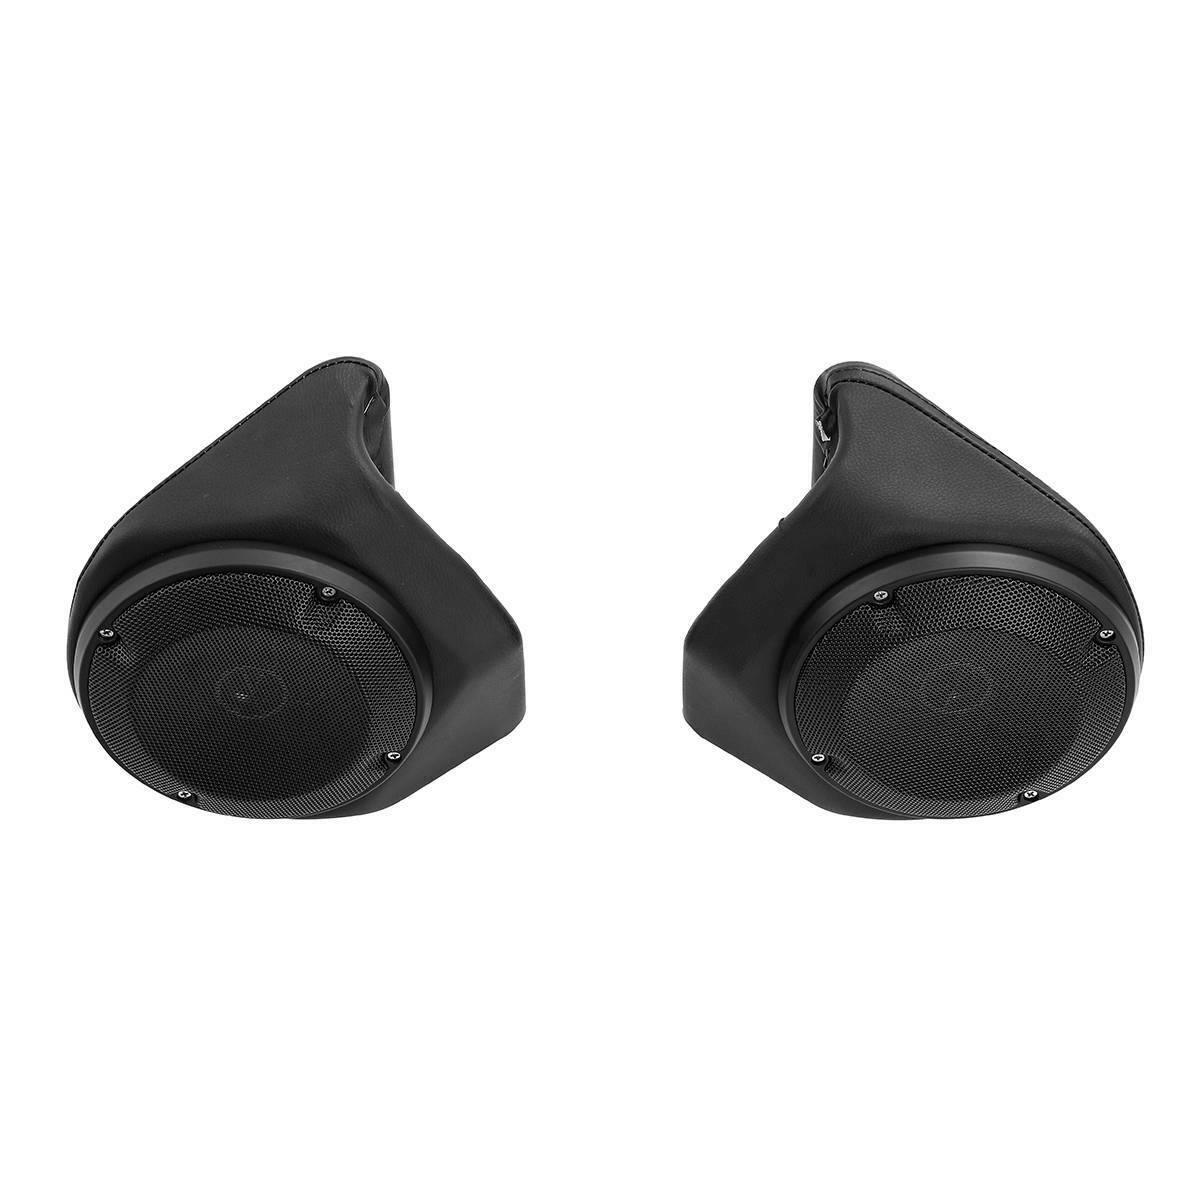 King Rear Pack Trunk 6.5" Speakers Fit For Harley Tour Pak Electra Glide 2014-Up - Moto Life Products